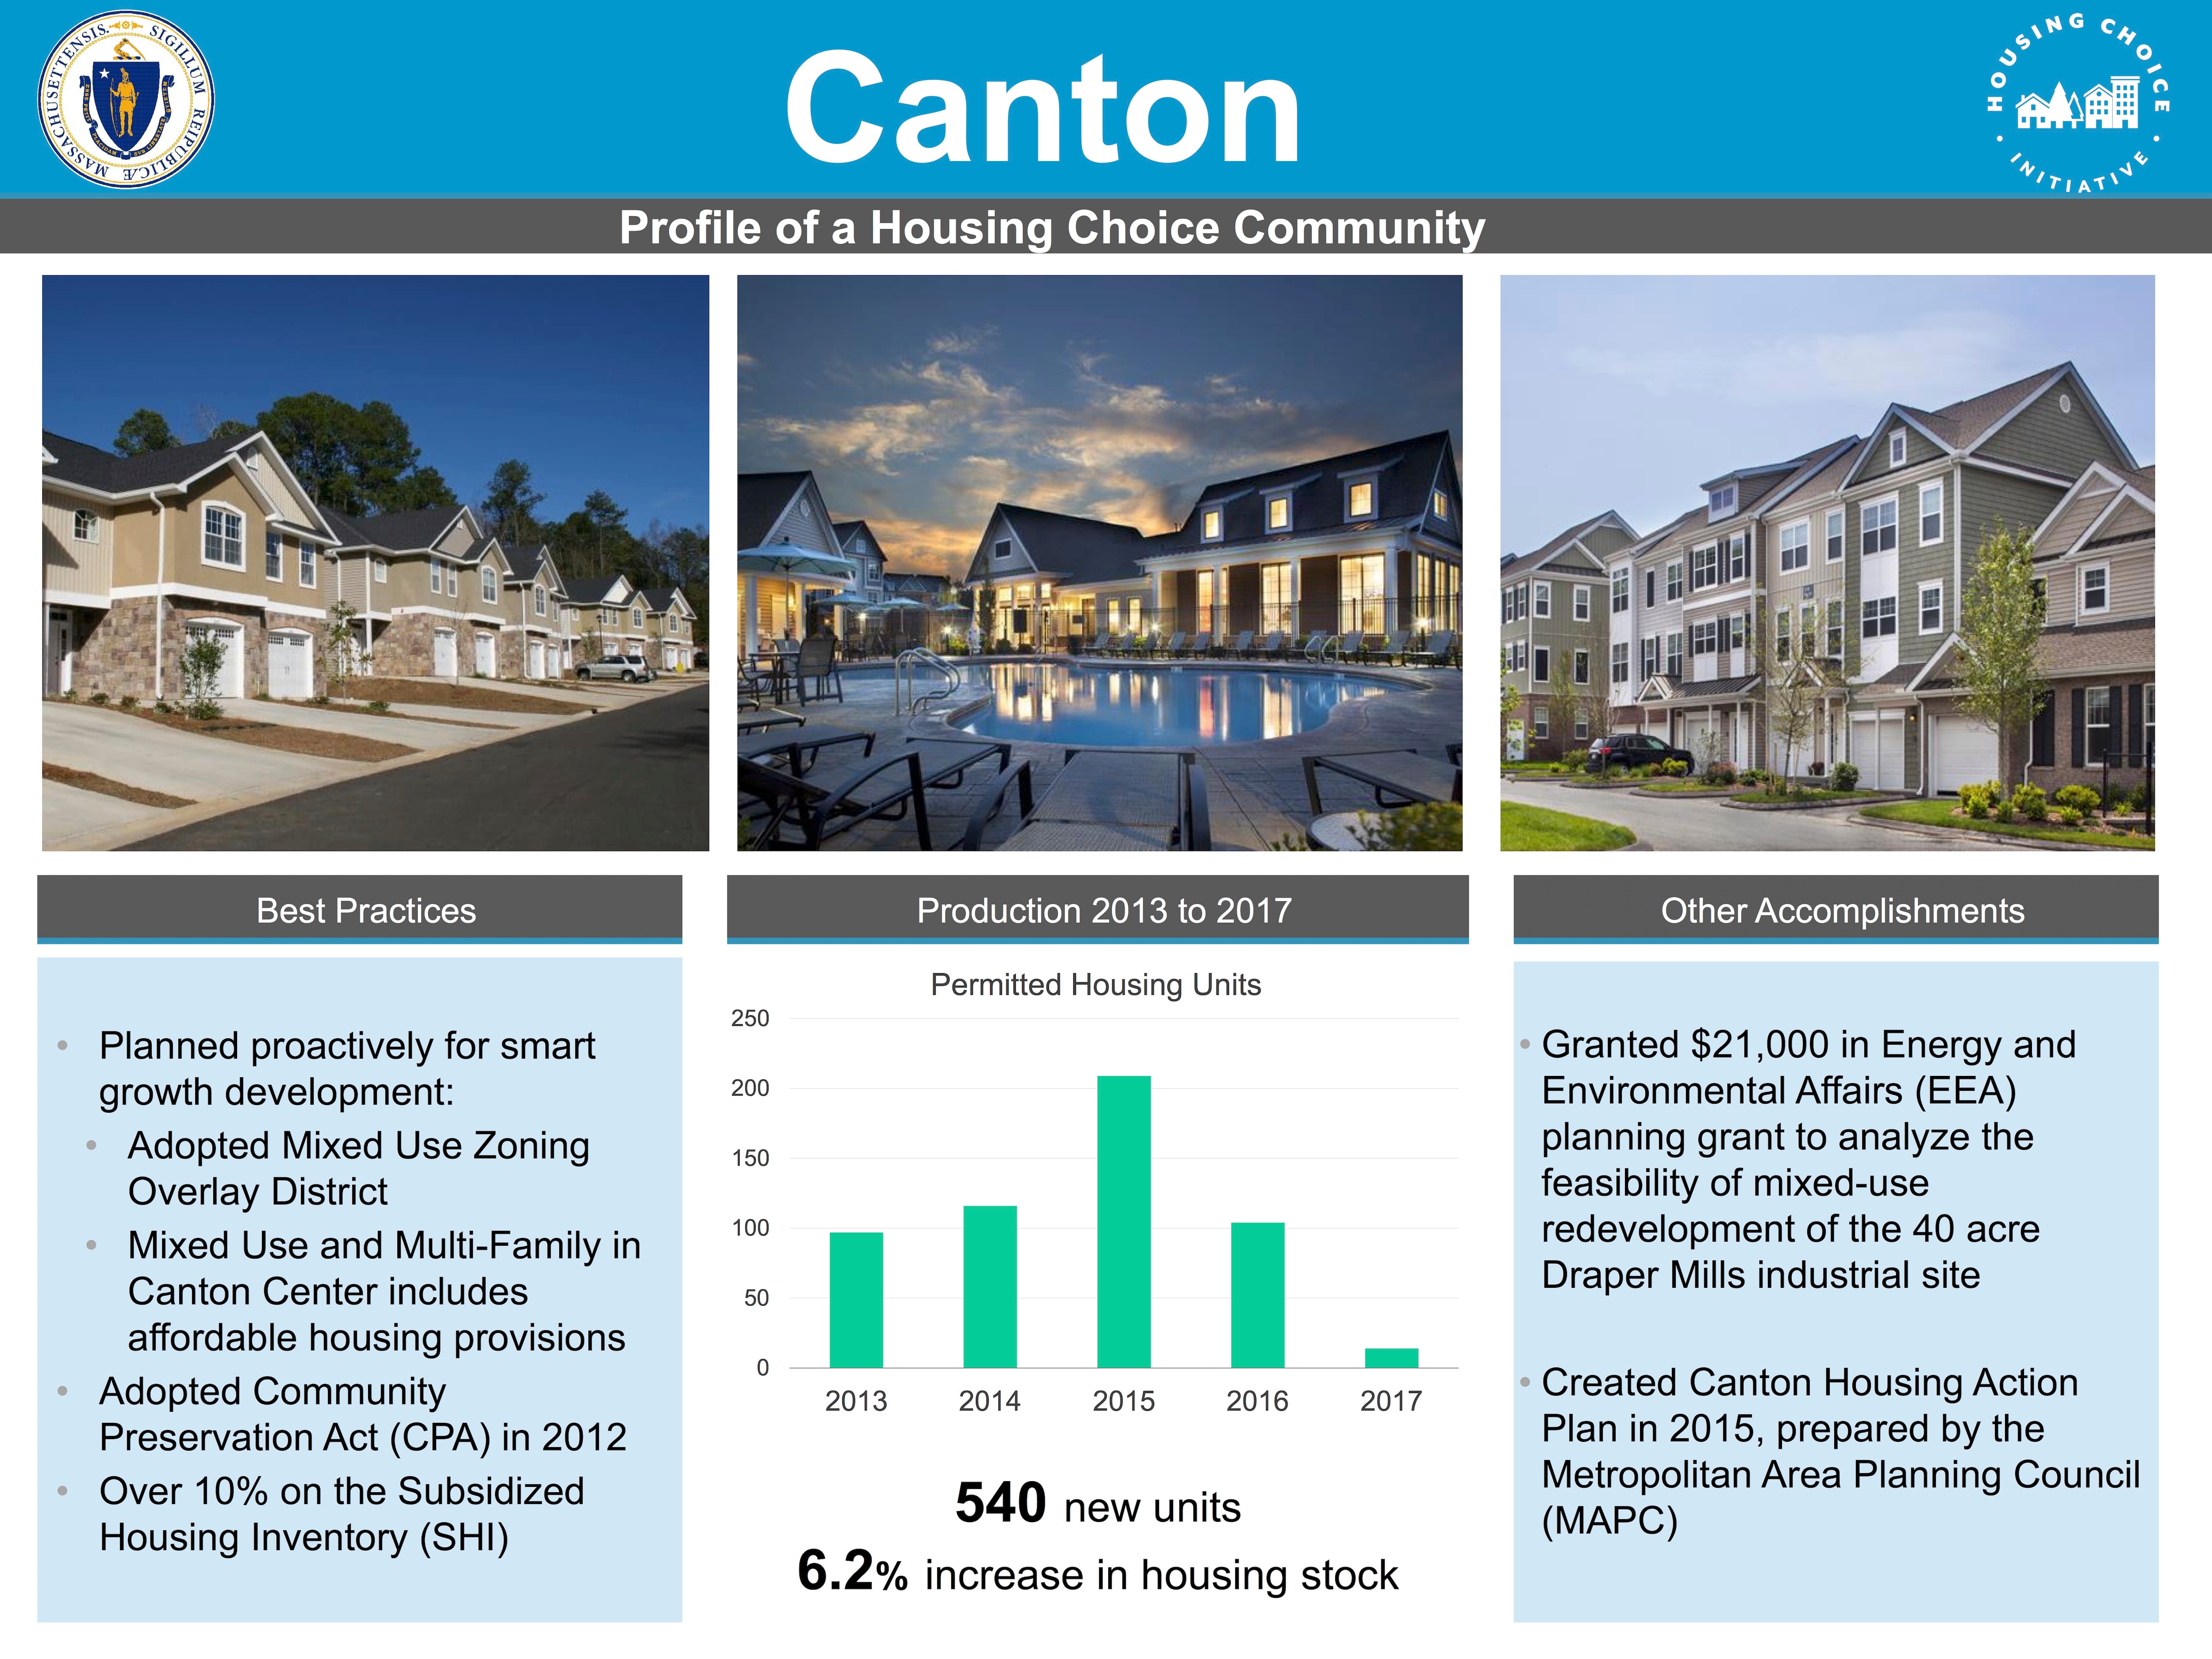 Profile of a Housing Choice Community - Canton